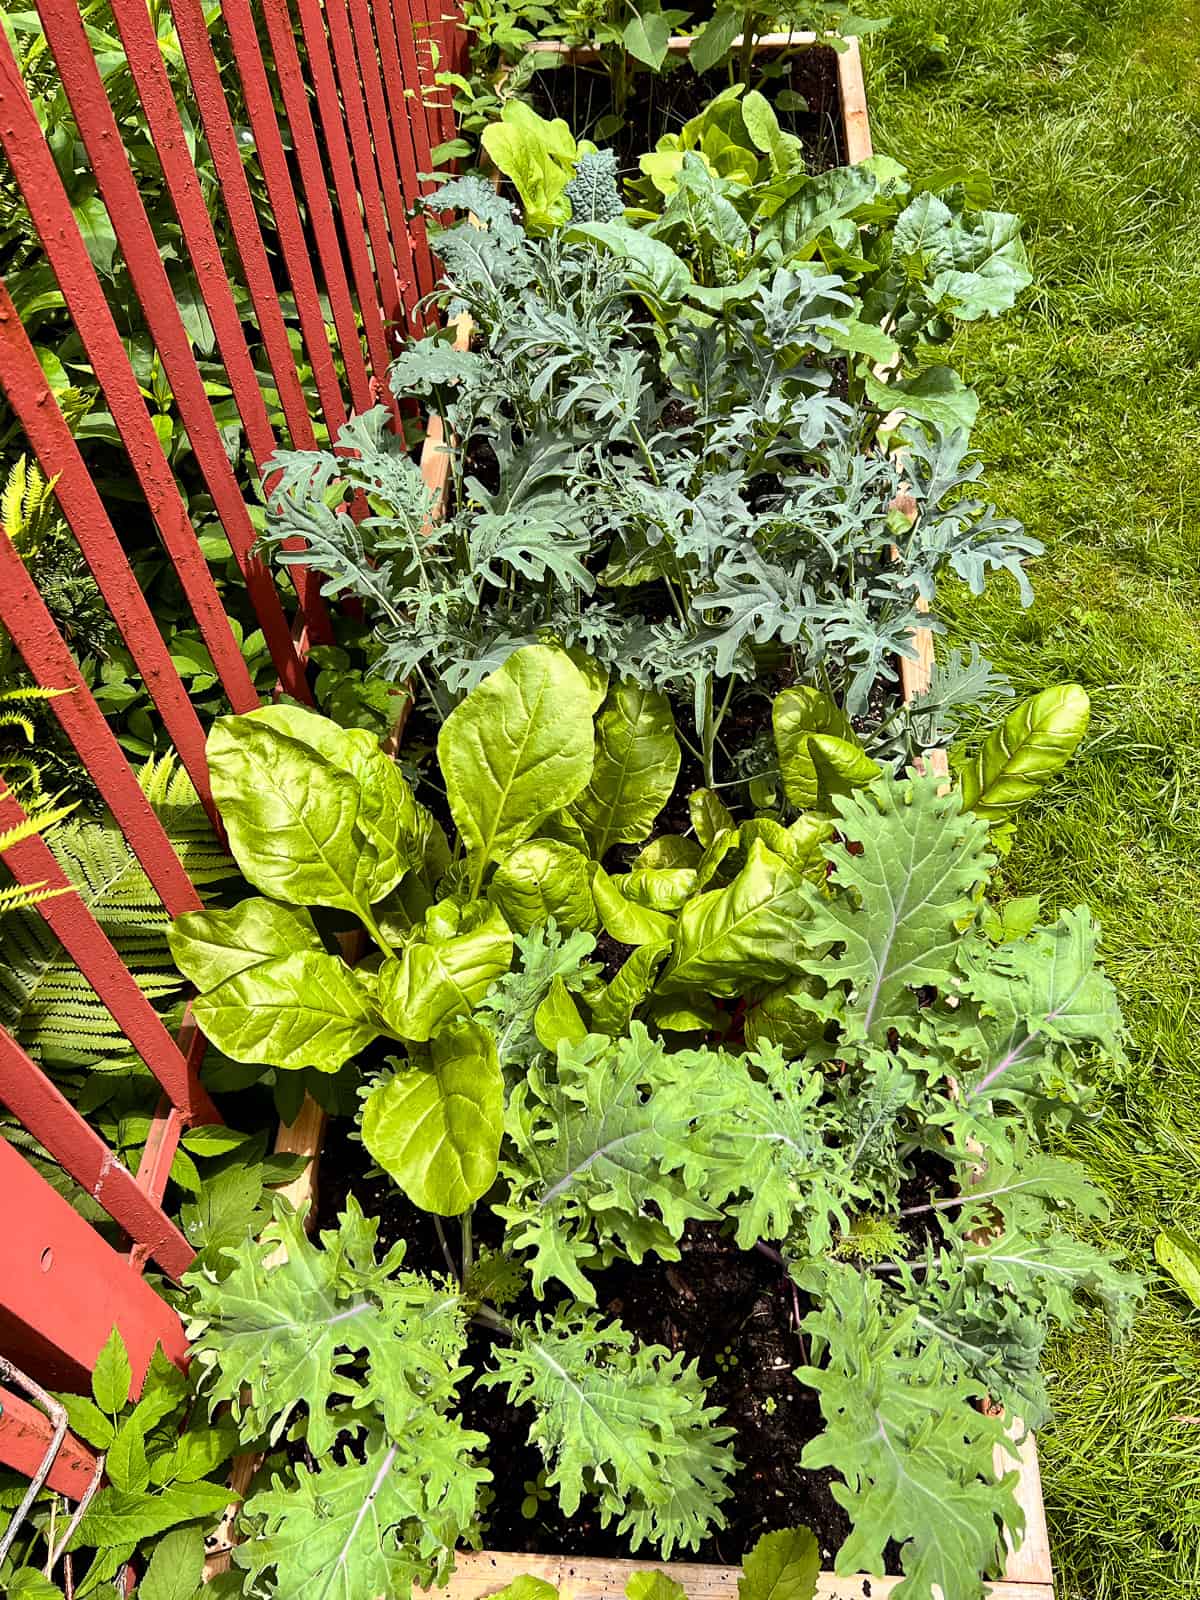 An image of a square foot garden bed bursting with fresh edible plants.